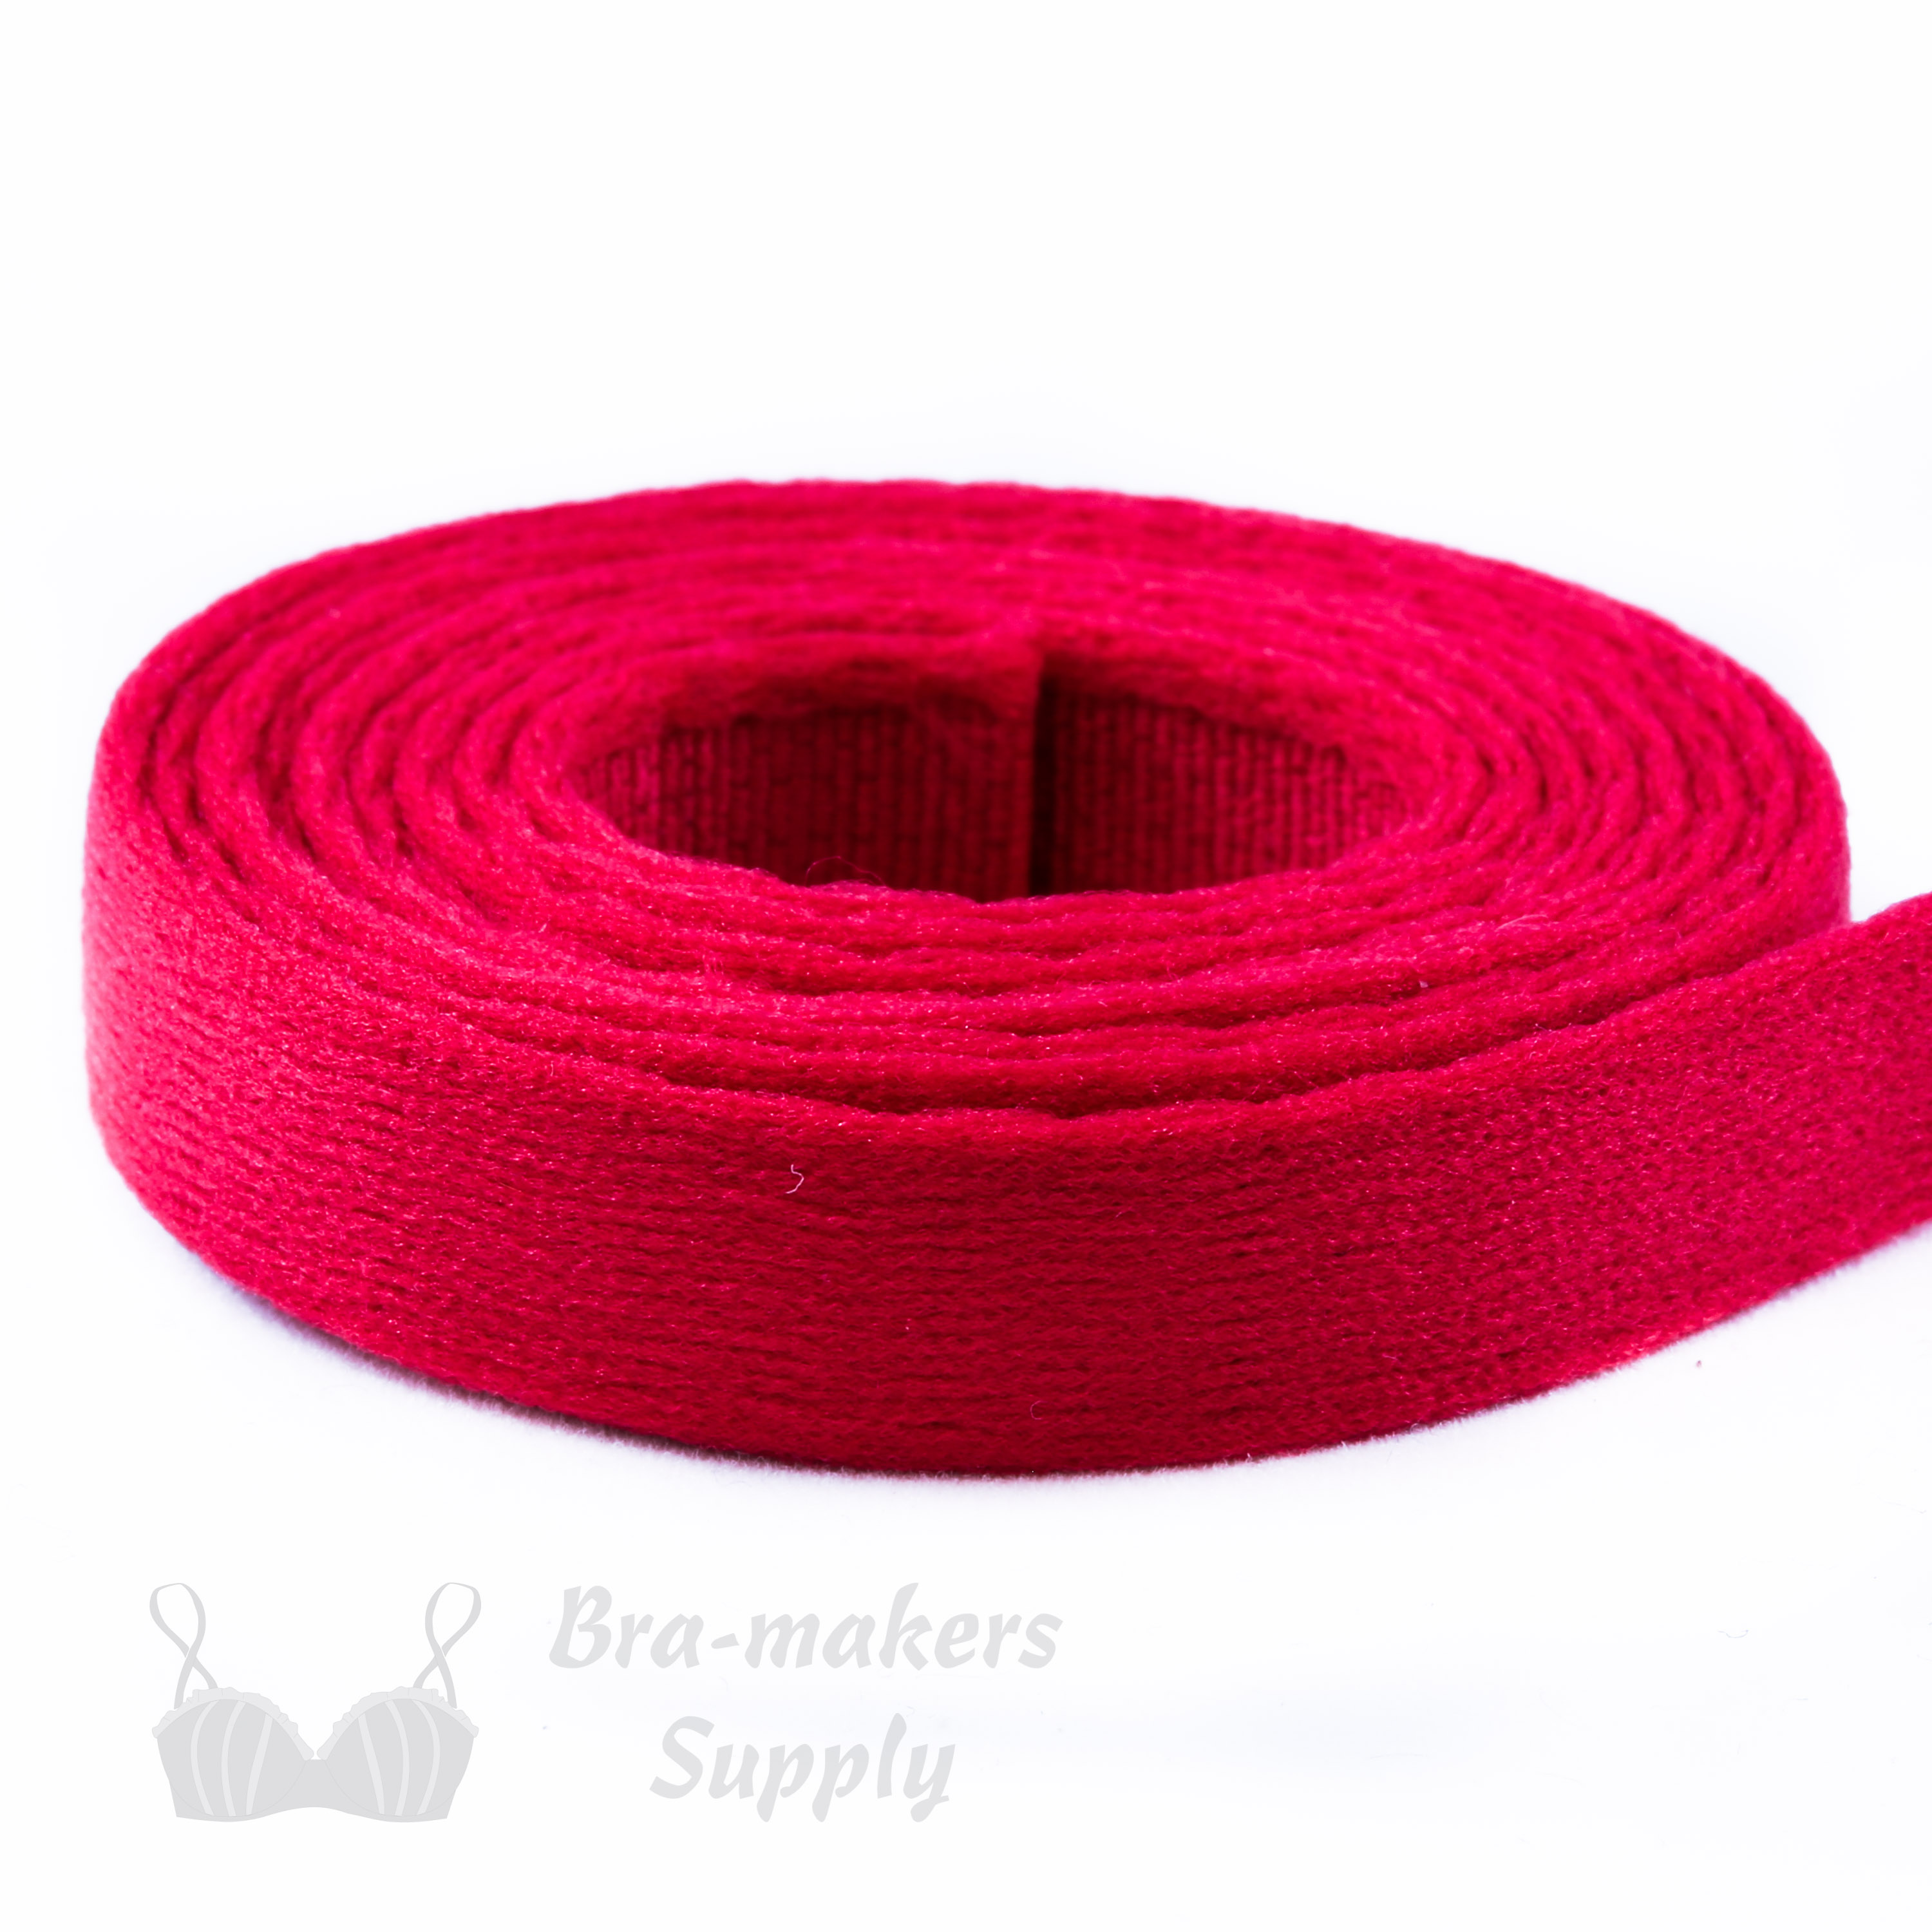 plush underwire casing red UP-2 or underwire channeling lollipop Pantone 18-1764 from Bra-makers Supply 1 metre roll shown